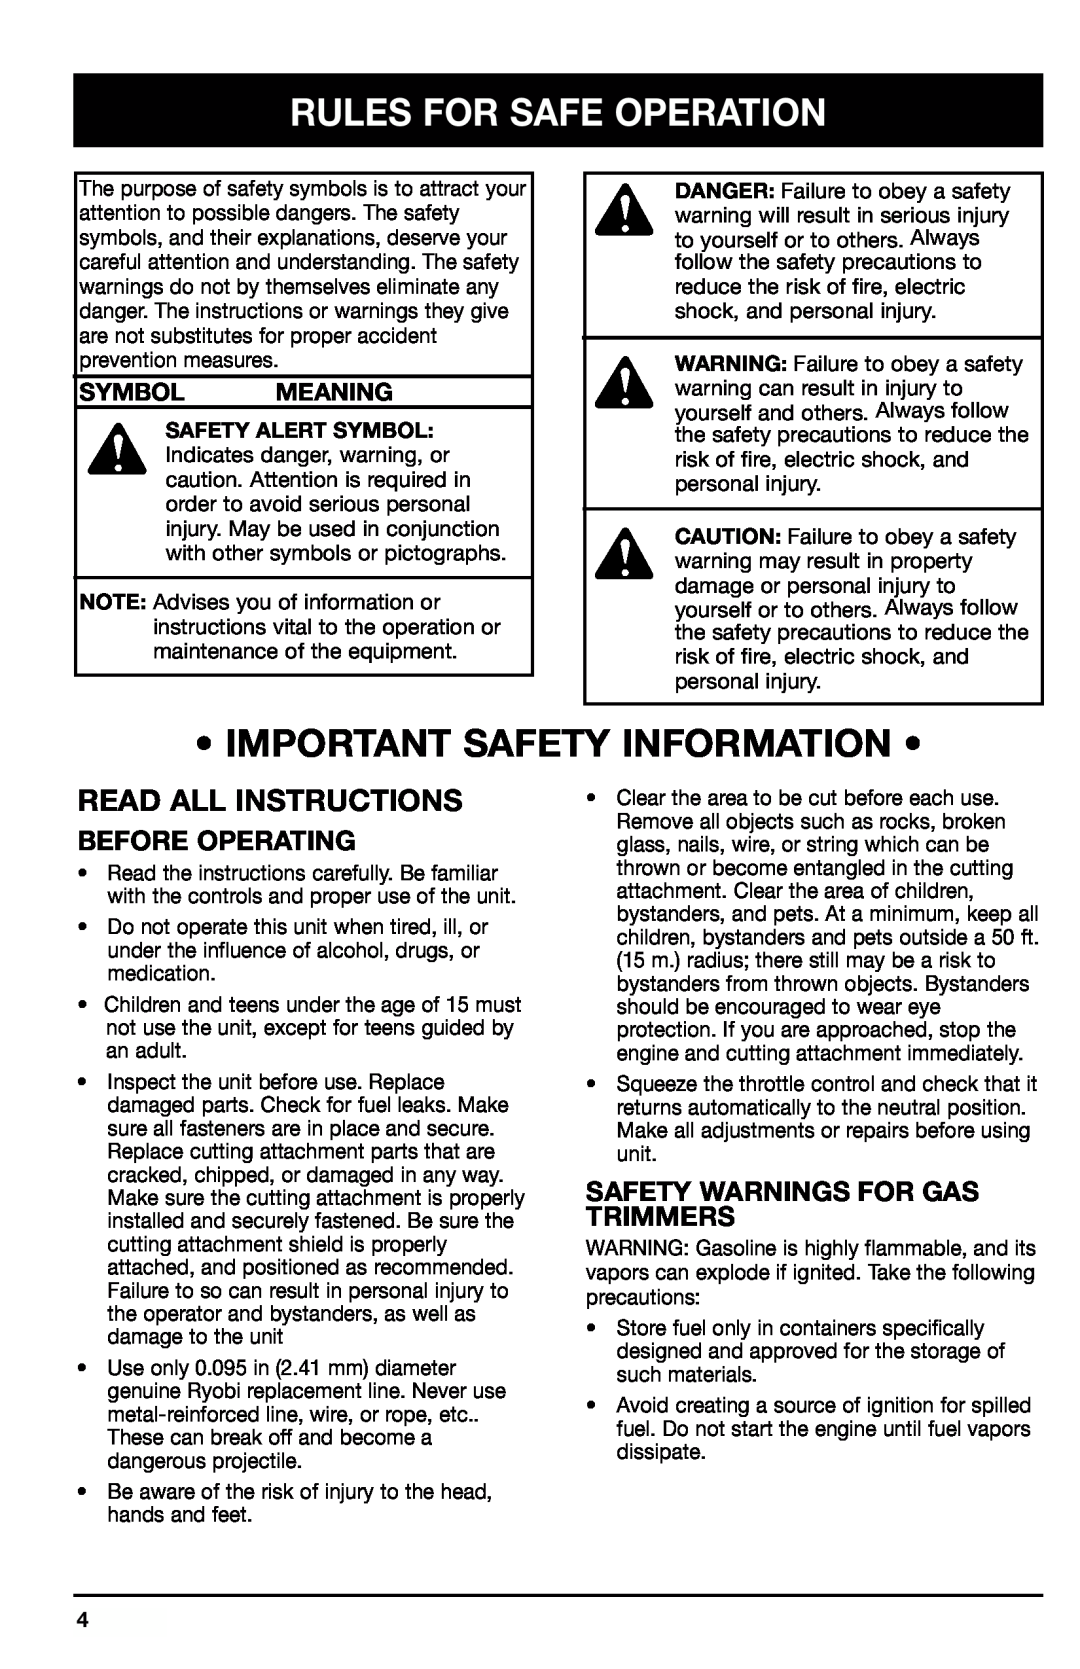 Ryobi 780r manual Rules For Safe Operation, Read All Instructions, Before Operating, Safety Warnings For Gas Trimmers 